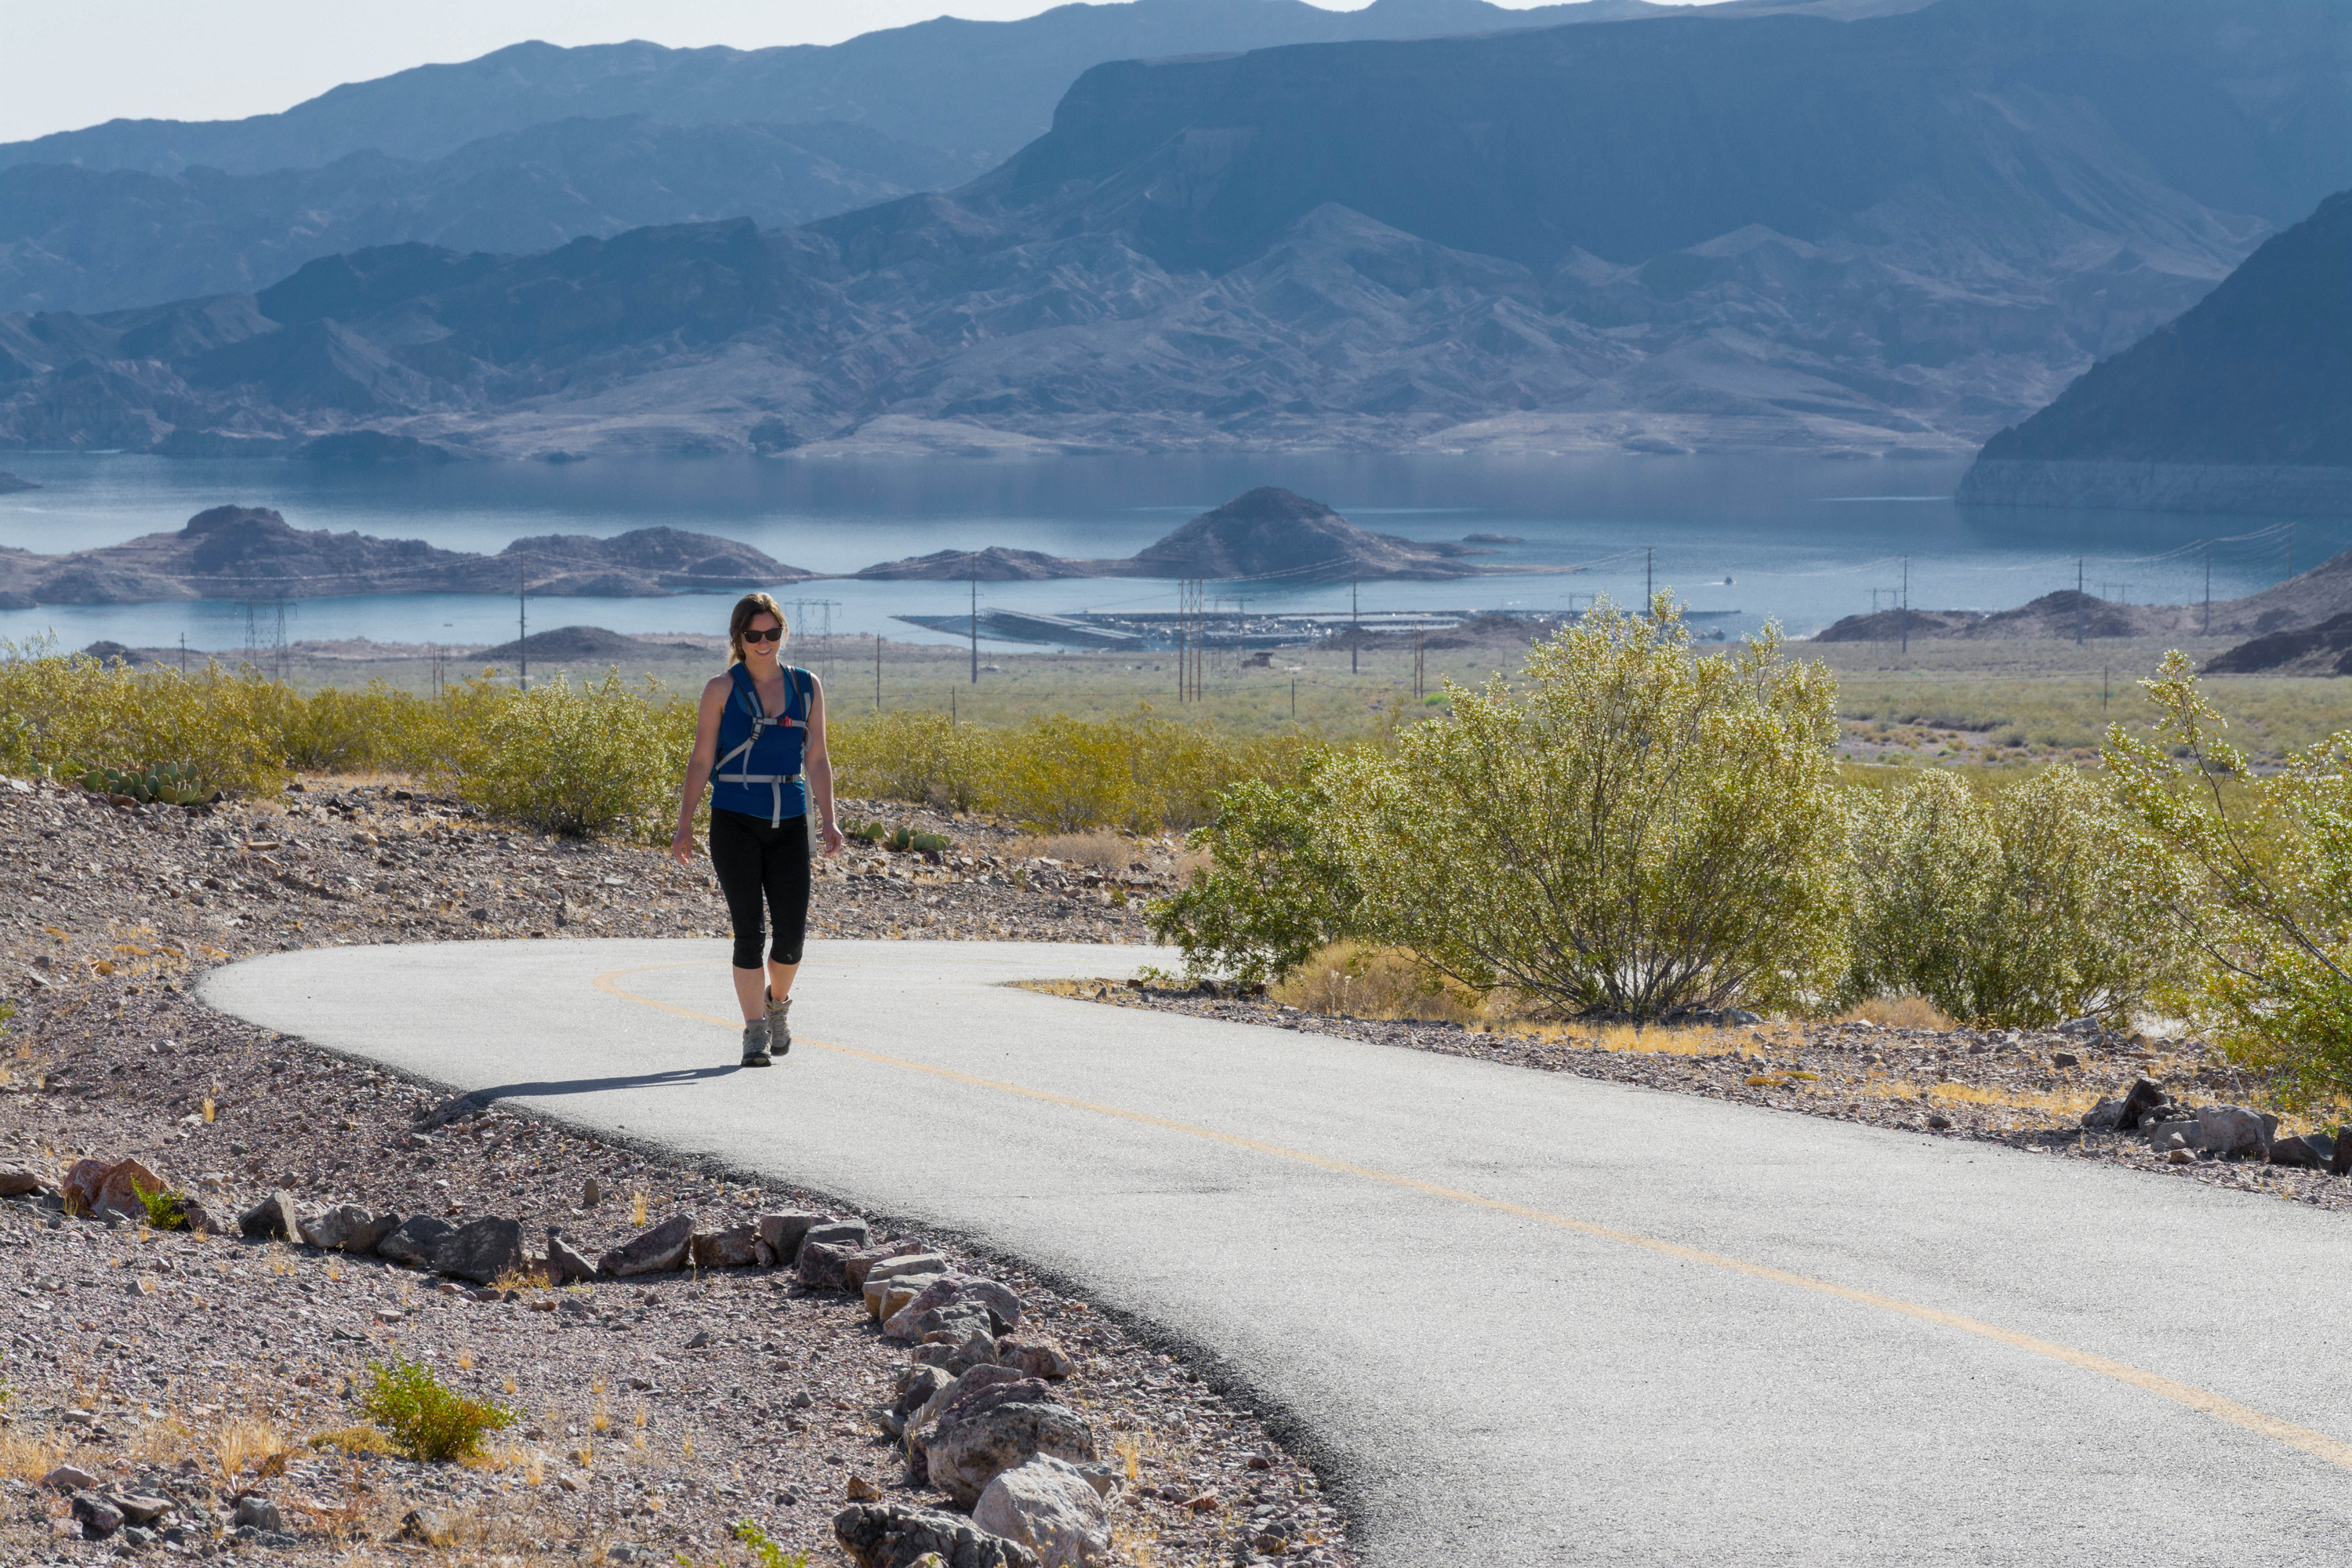 Hiker on S curve of paved trail, lake and mountains in background 